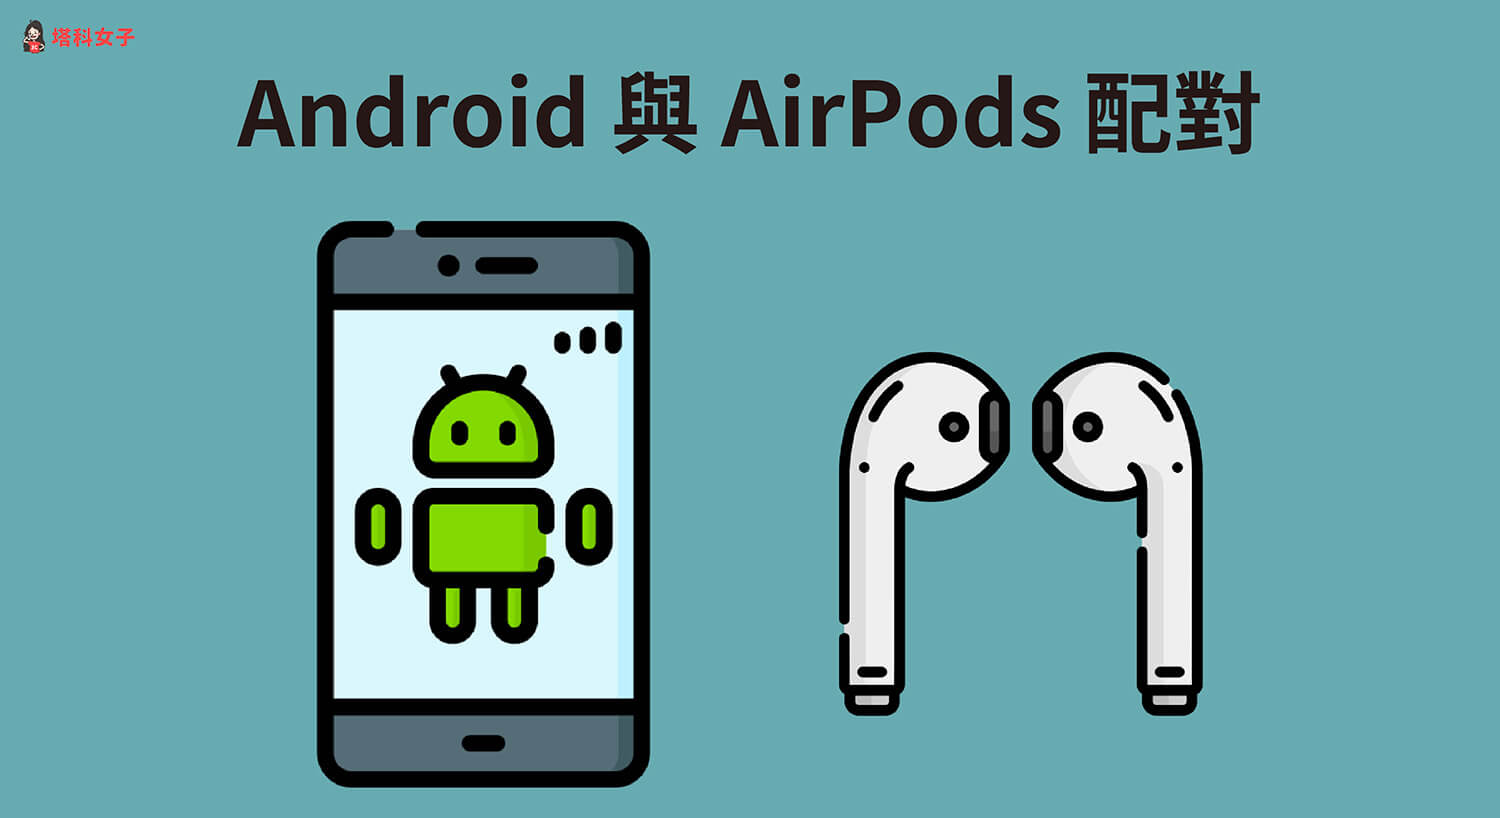 Android AirPods 配對教學，安卓也能連線 AirPods、AirPods Pro